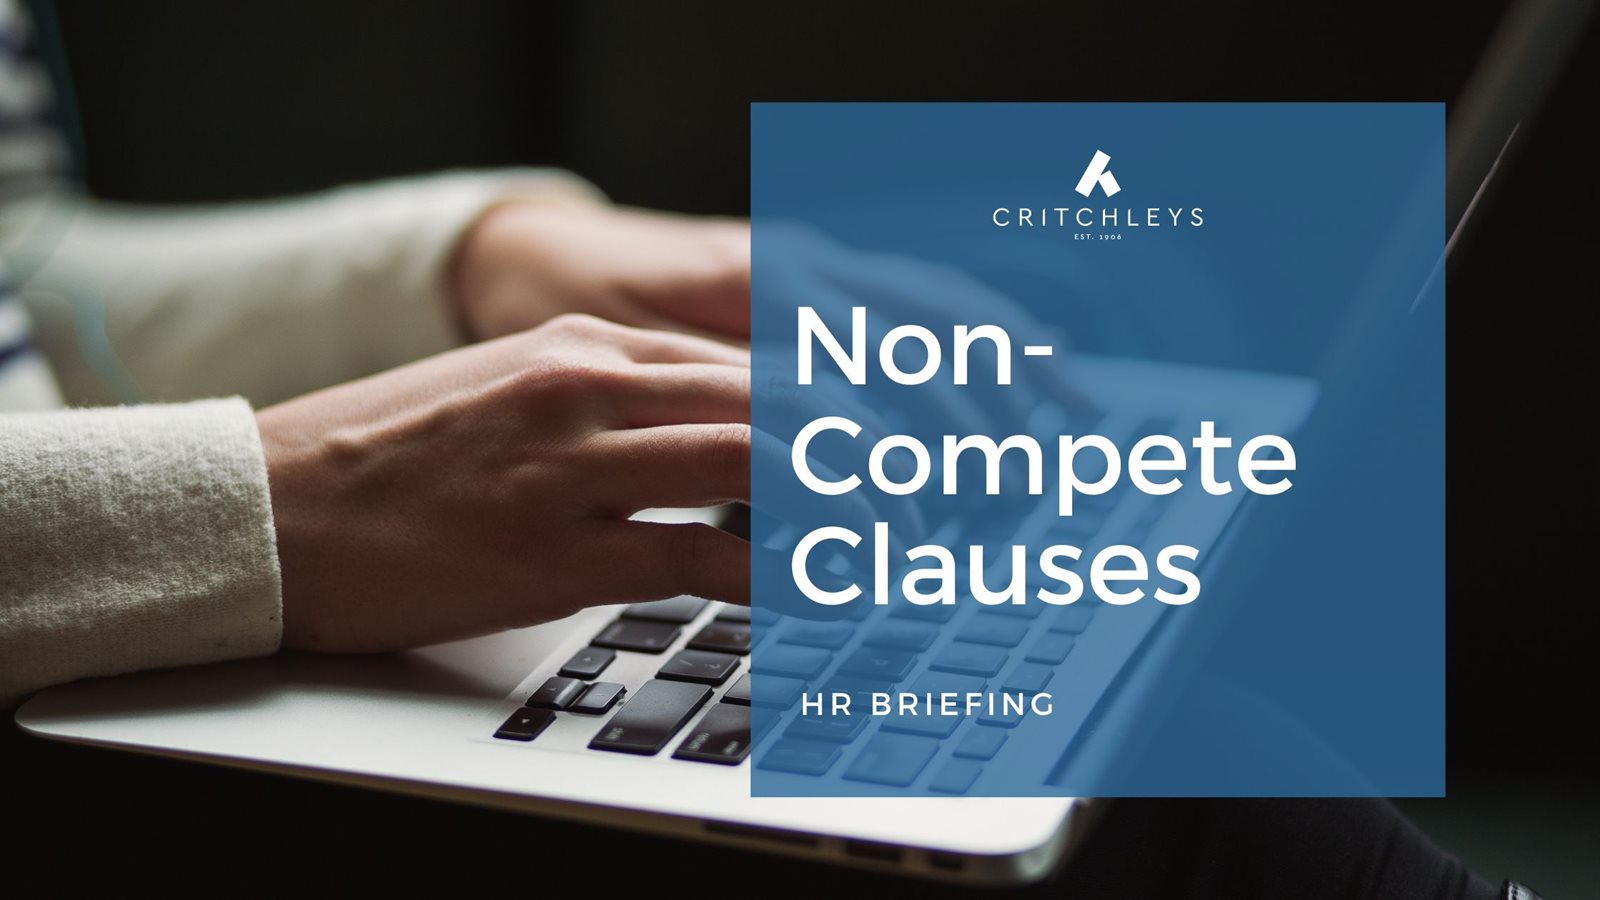 Non-compete clauses to be limited to three months